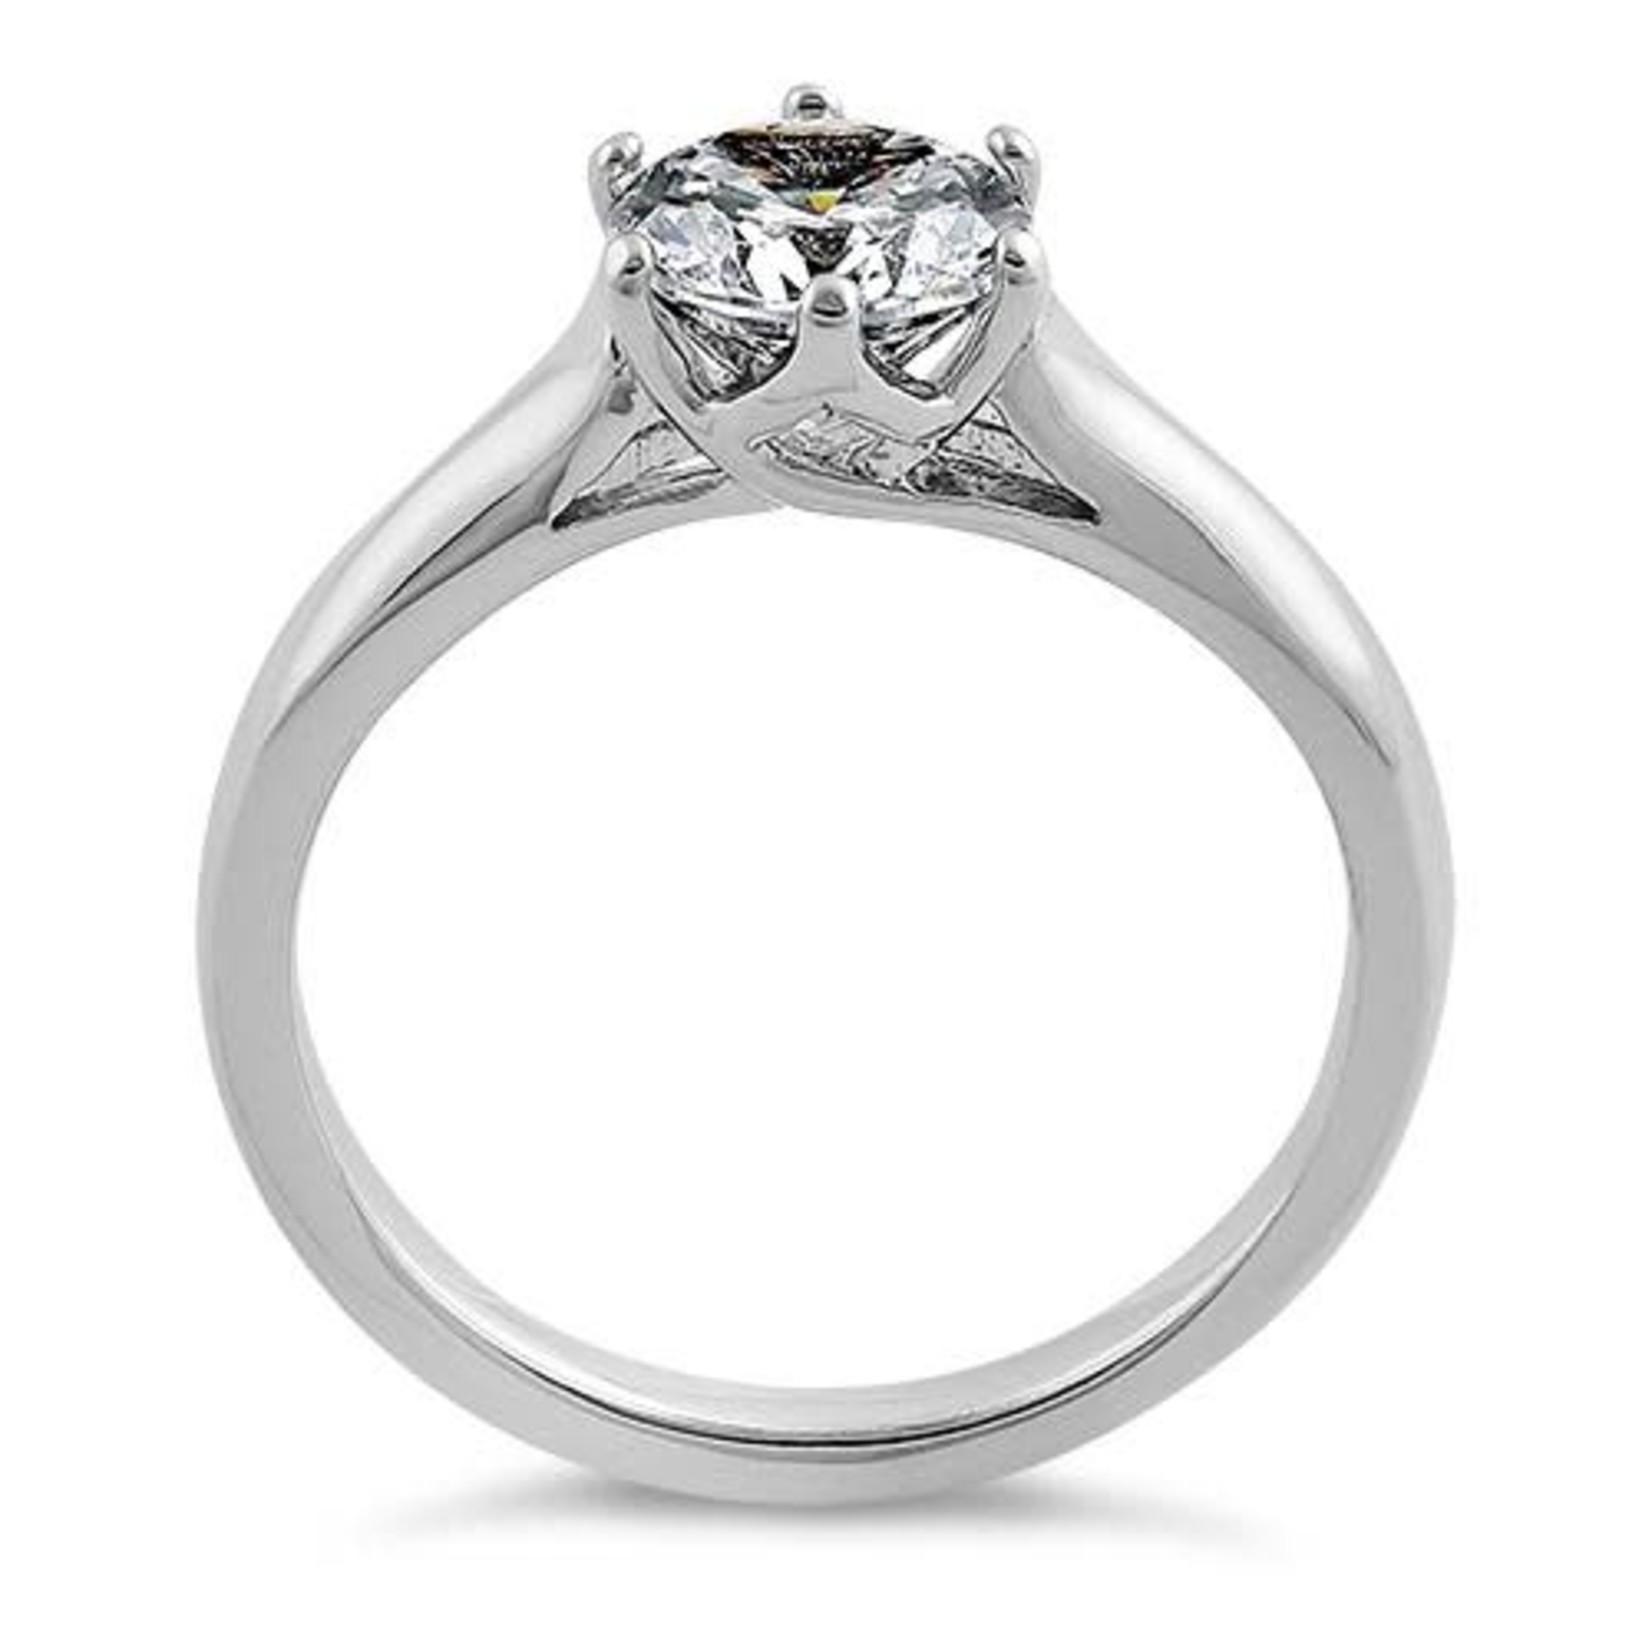 Sterling Silver Solitaire Round Clear Engagement Ring